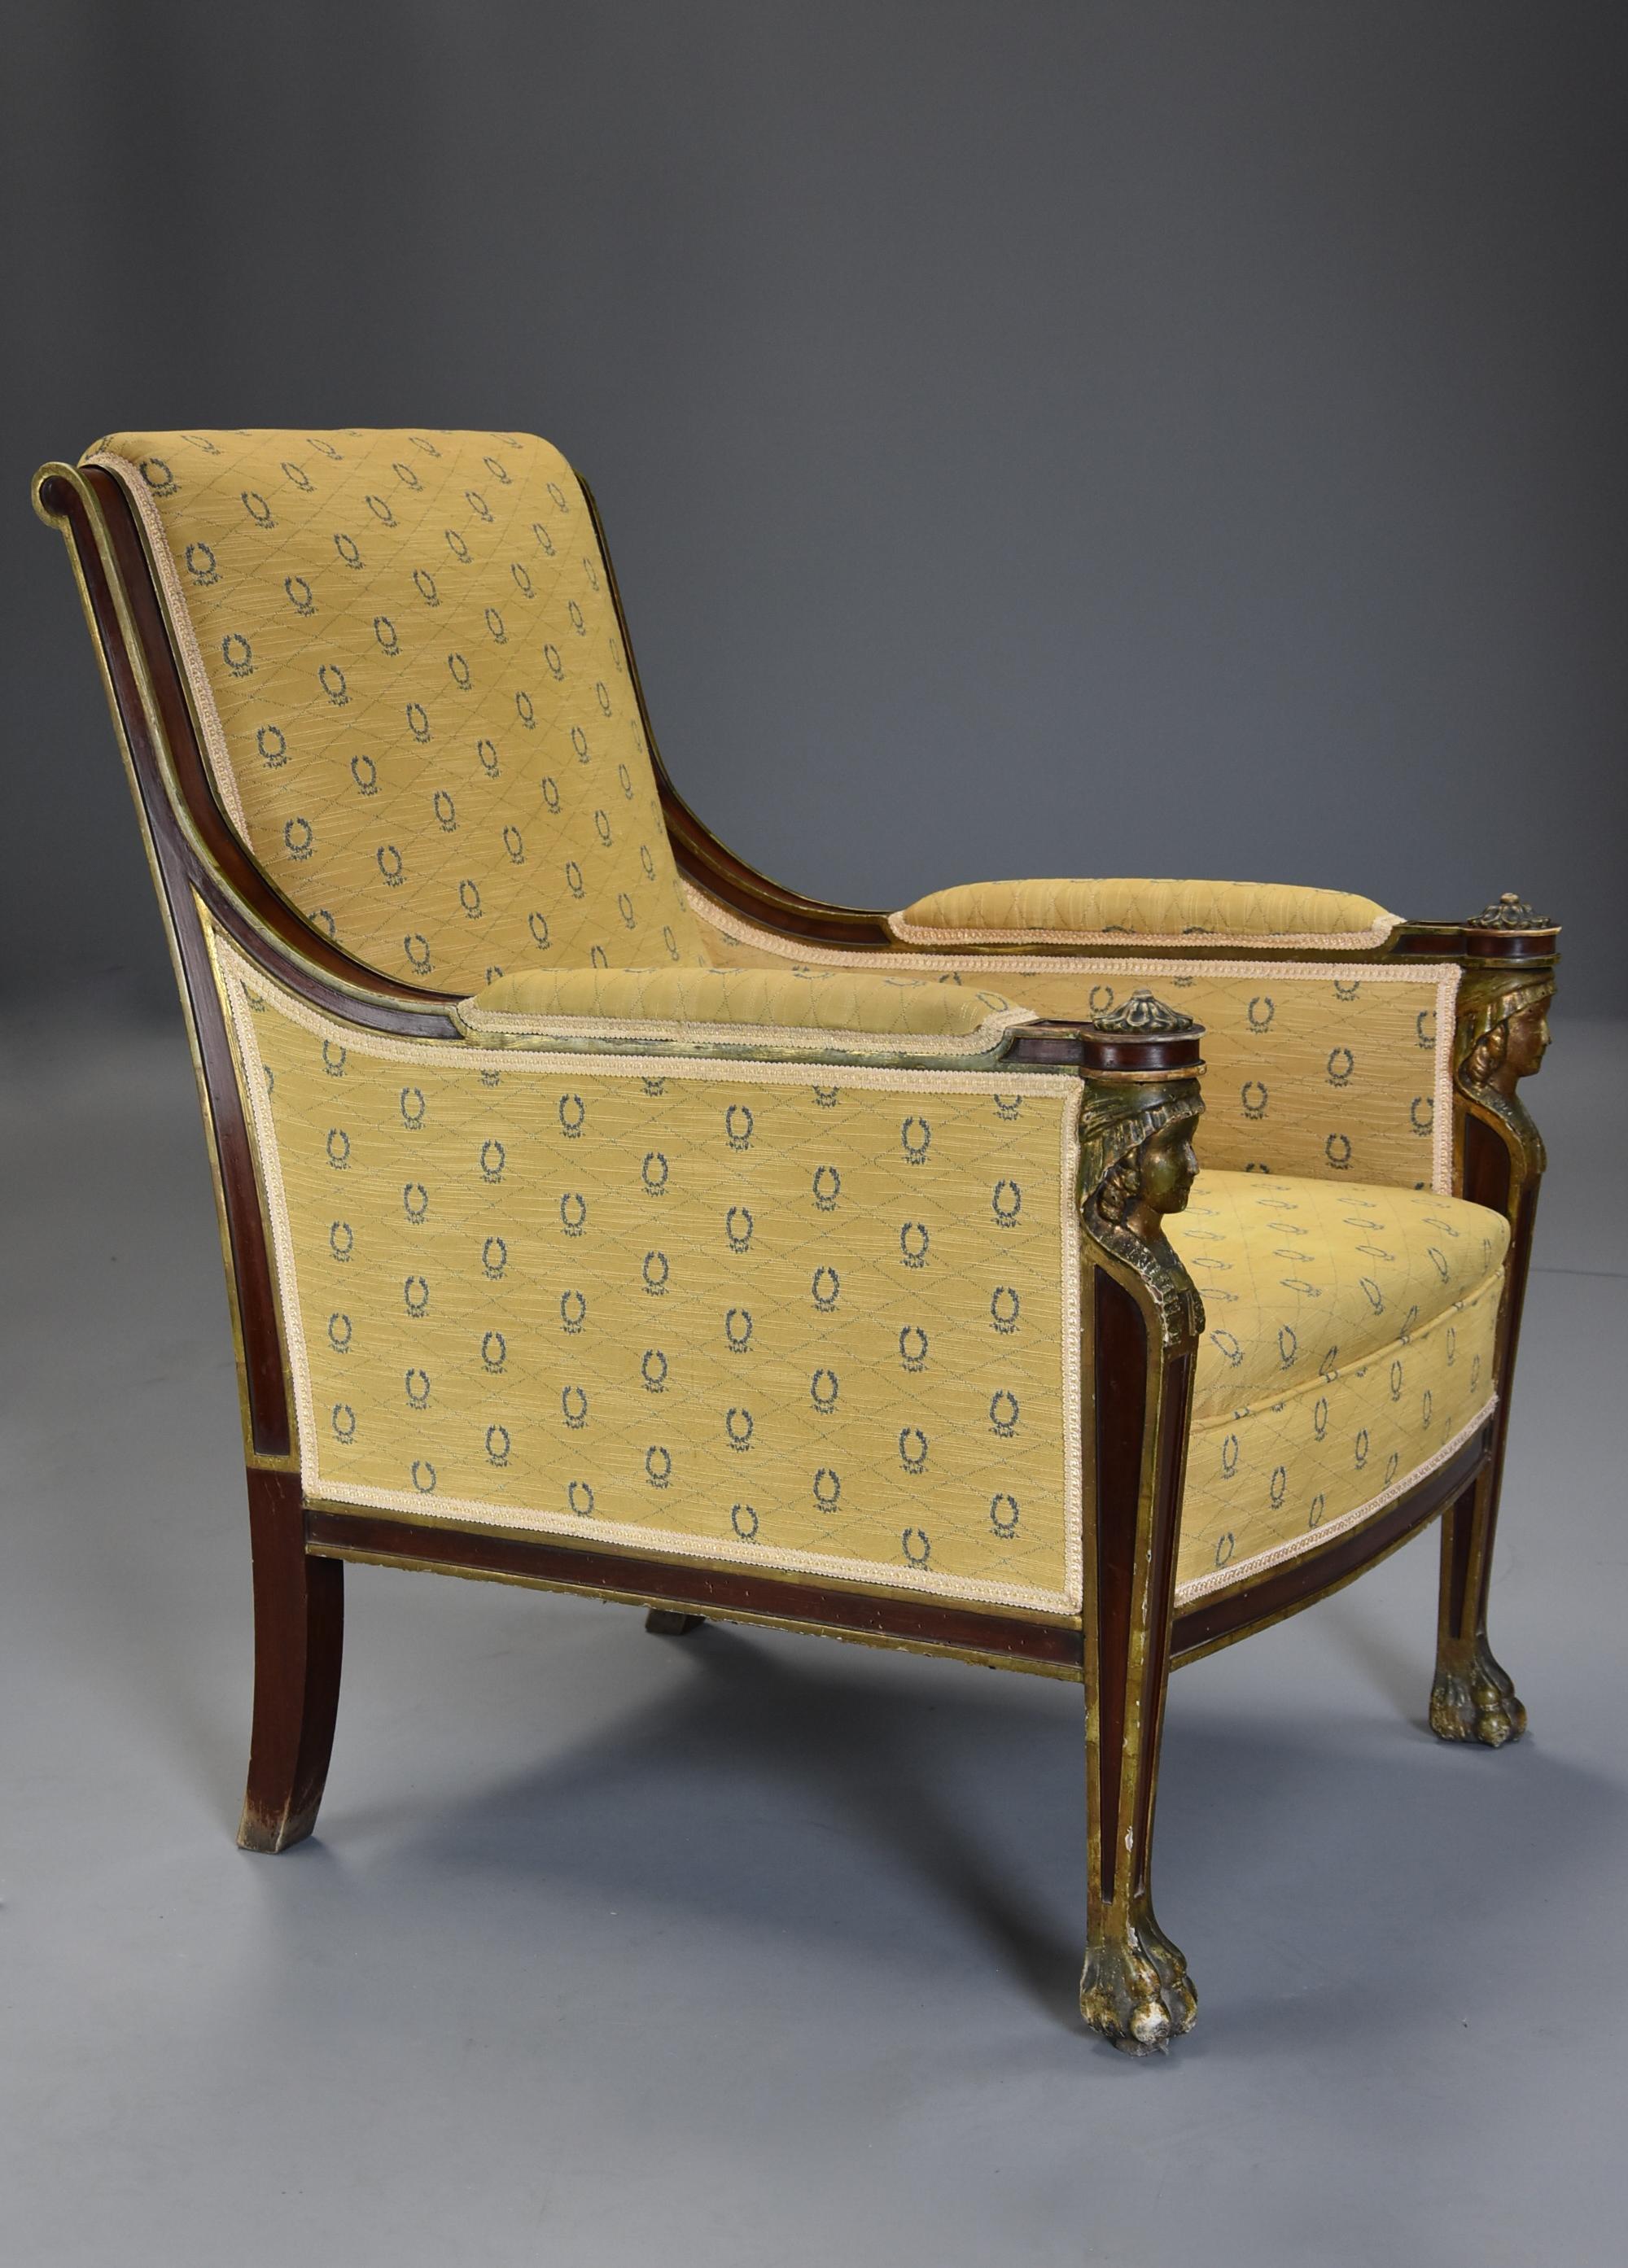 Highly Decorative Early 20th Century French Empire Style Mahogany Armchair For Sale 5